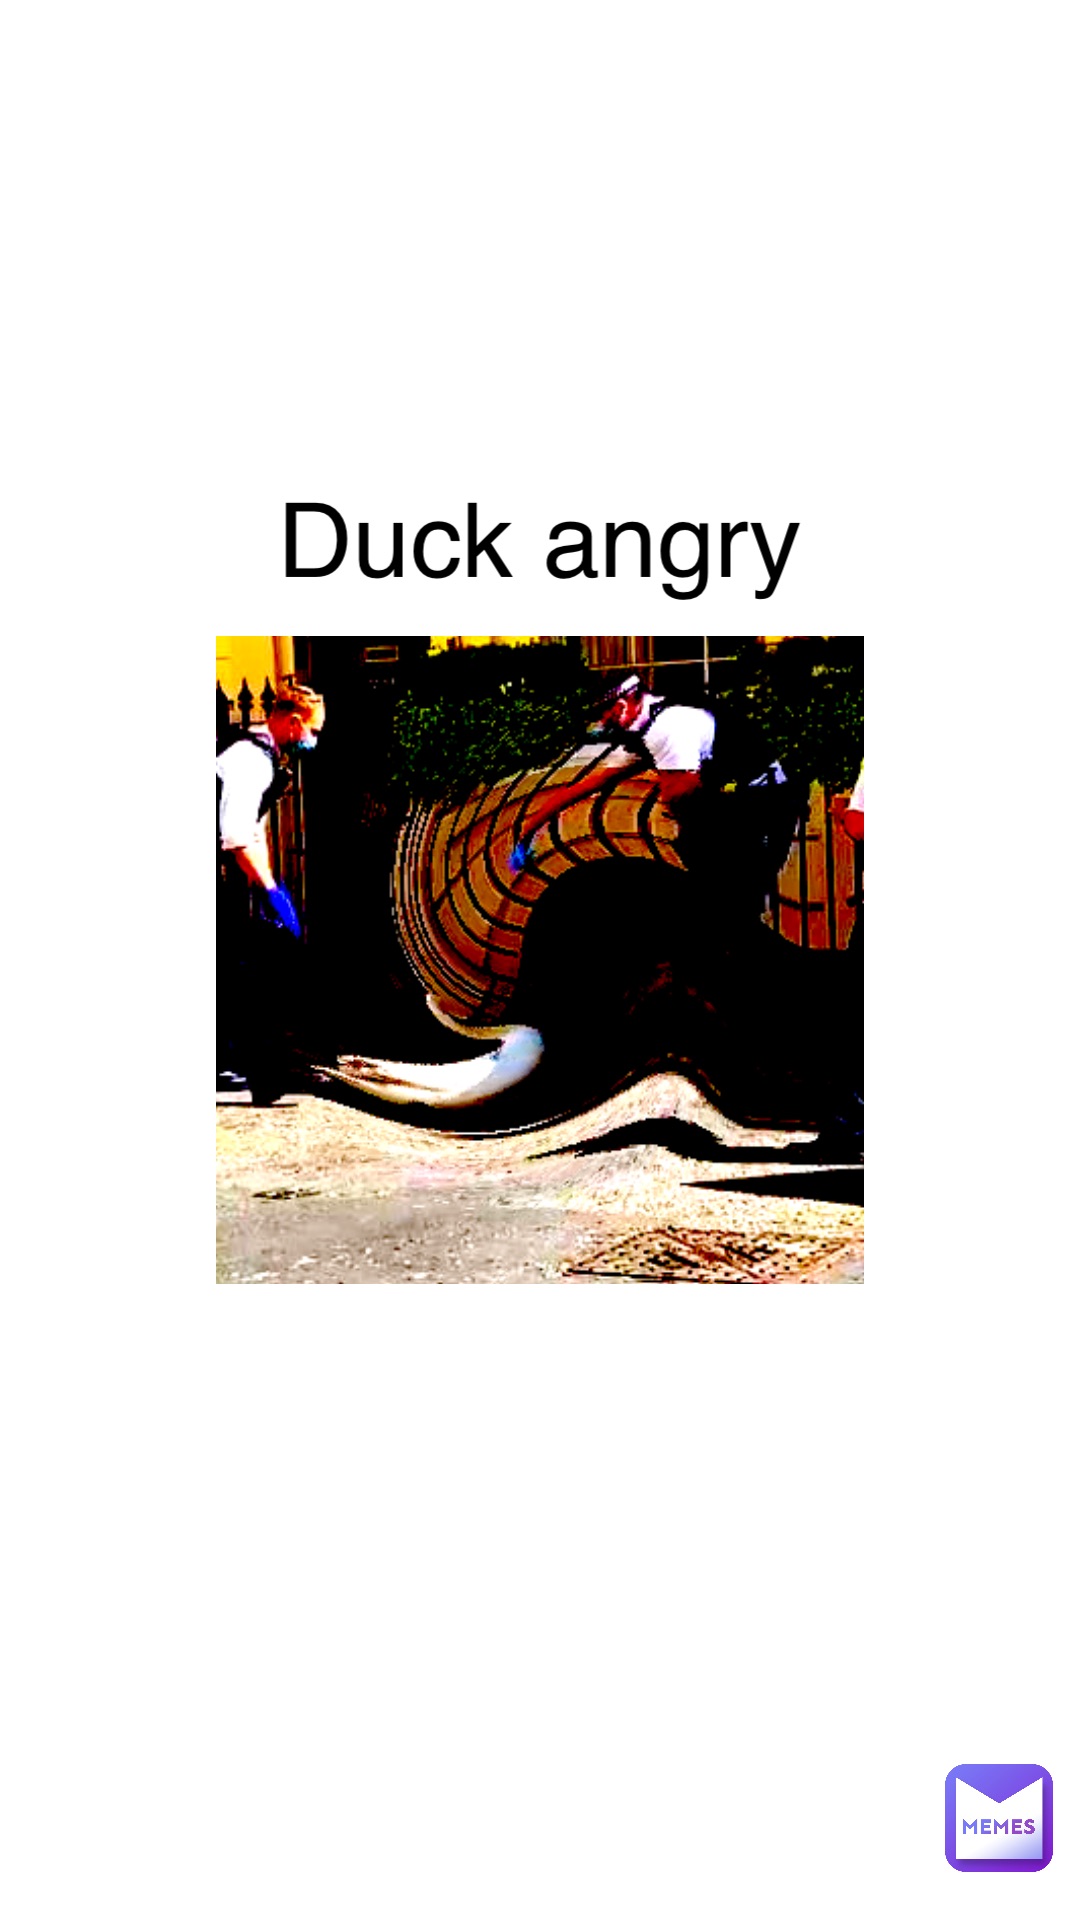 DuCk AnGrY